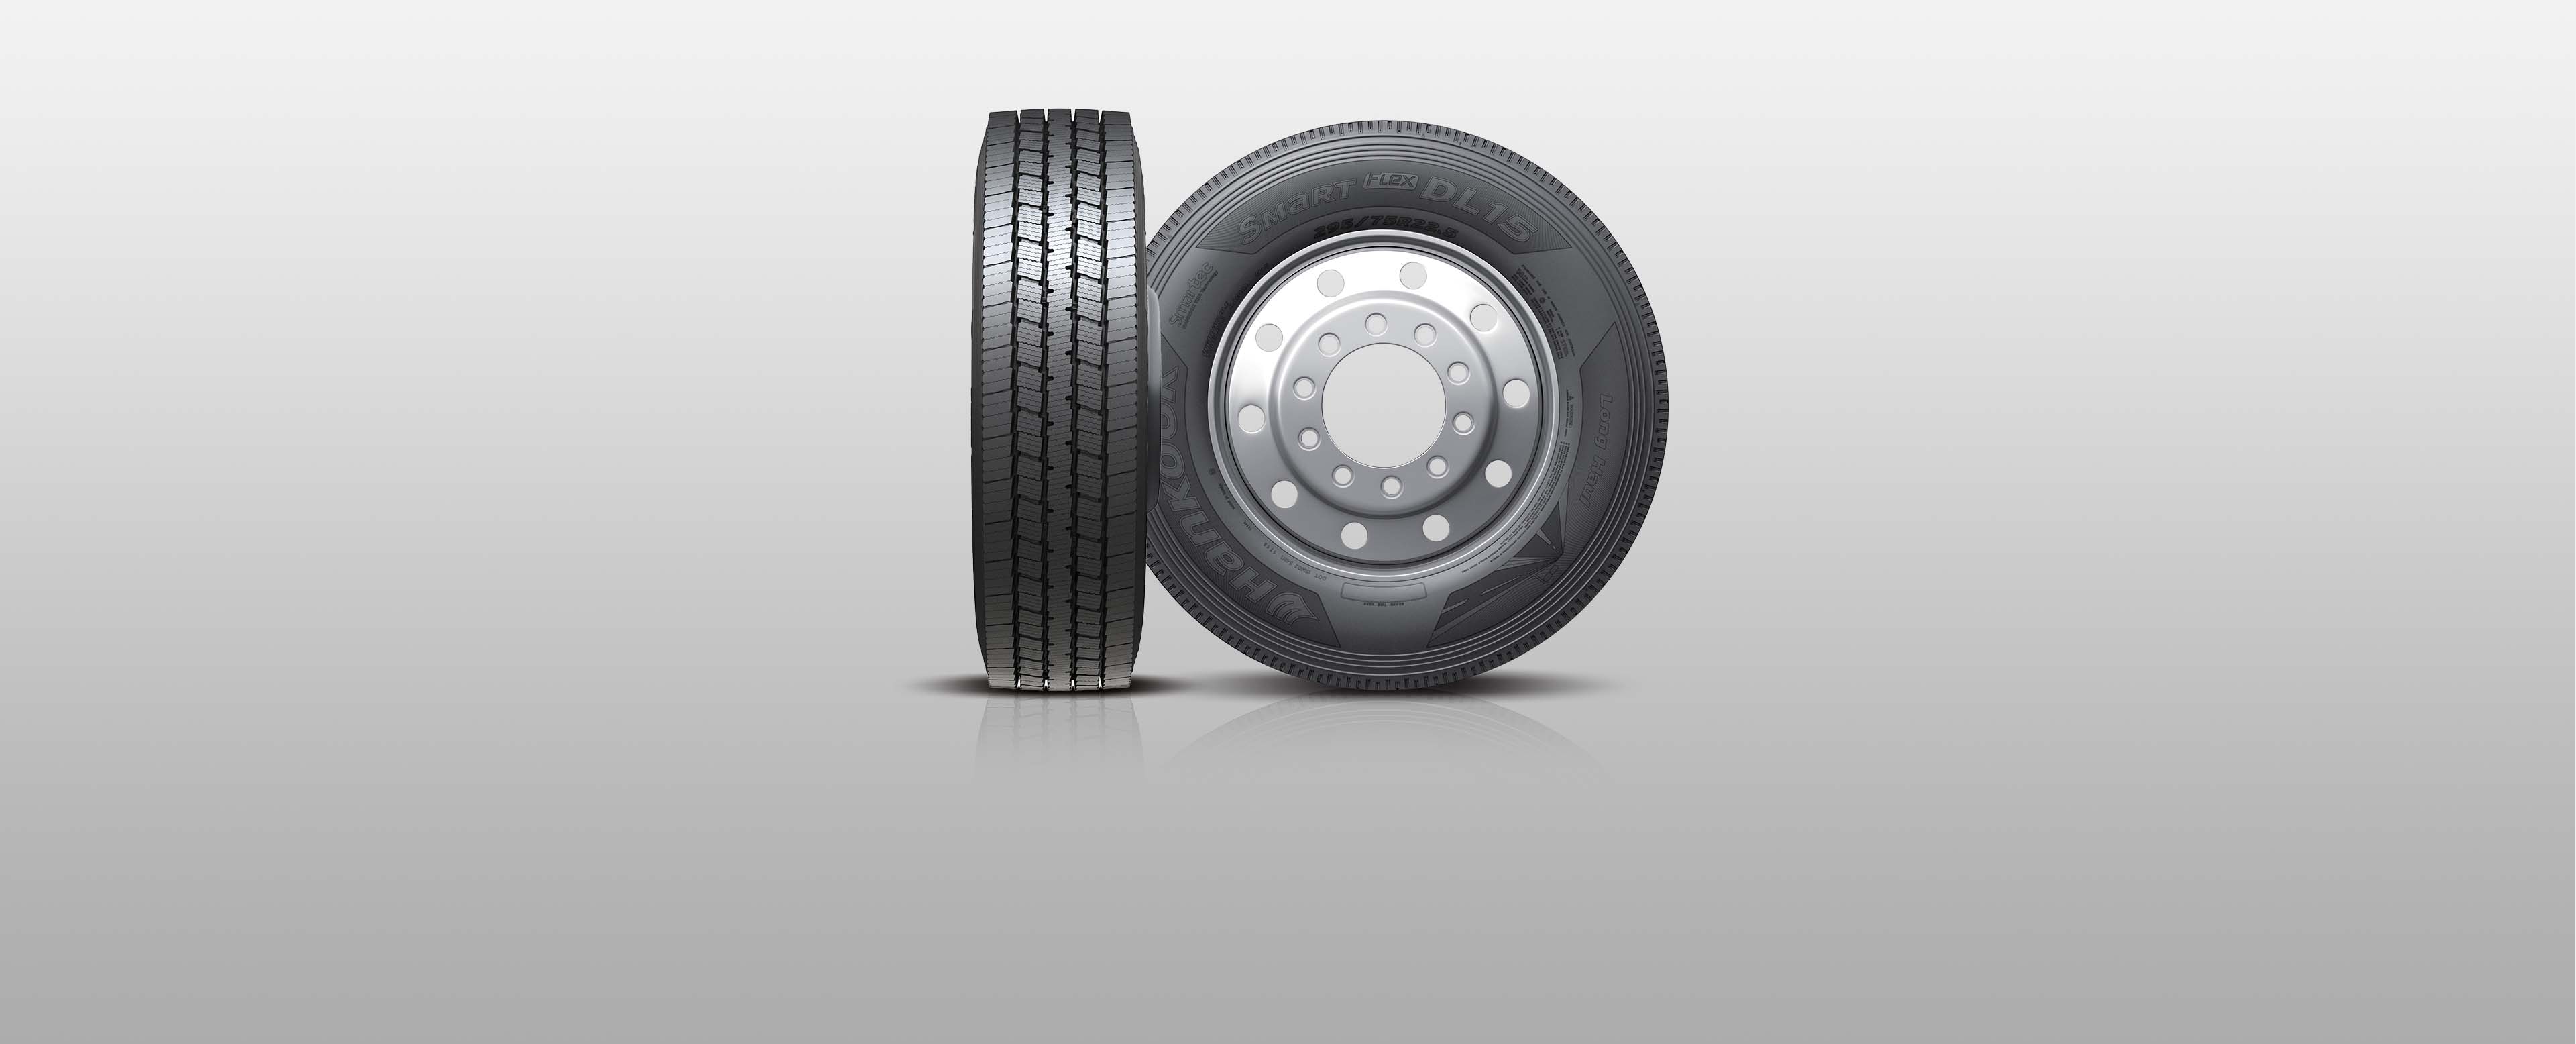 Hankook Tire & Technology-Tires-Smart-Smart Flex-DL15-Fuel Efficient and Optimized Traction Performance for Long and Regional Haul